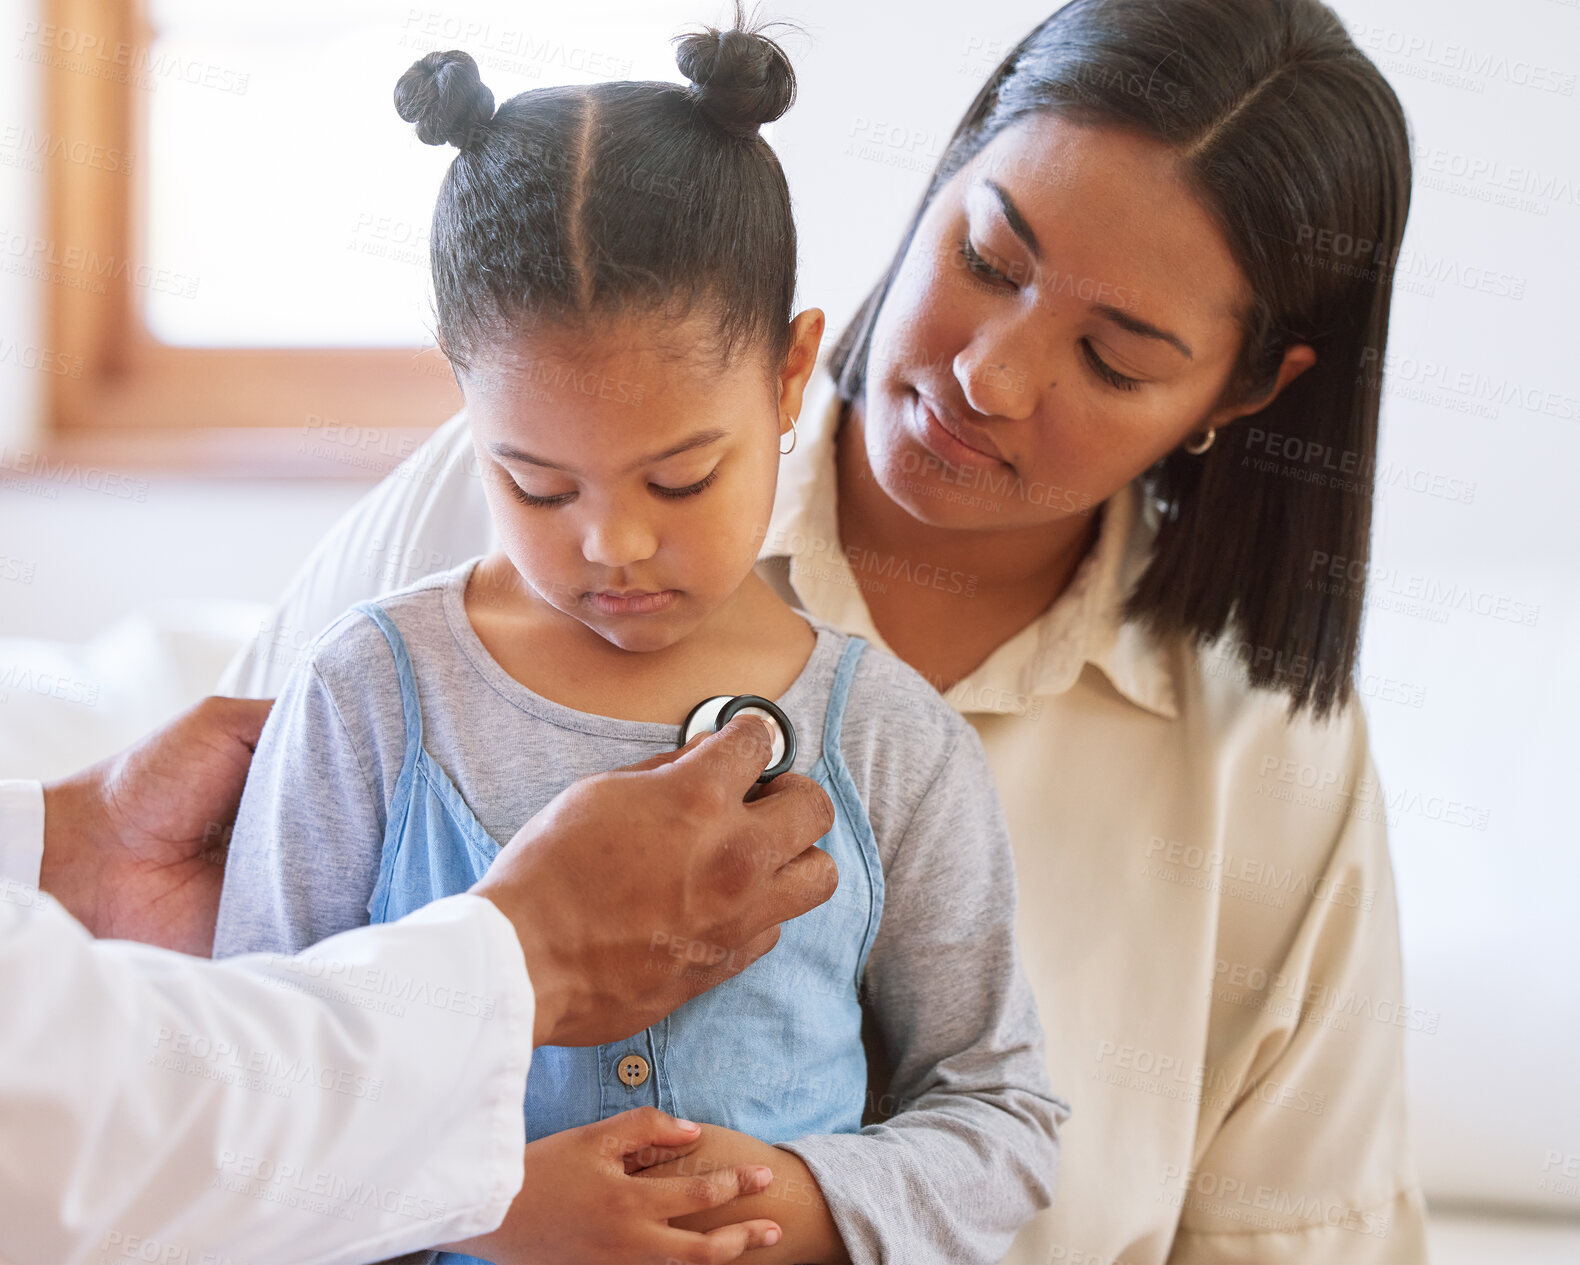 Buy stock photo Sad little girl at doctor's office. Sick girl sitting with mother while male paediatrician listen to chest heartbeat. Male doctor examining child with stethoscope. Mom holding kid during doctor visit